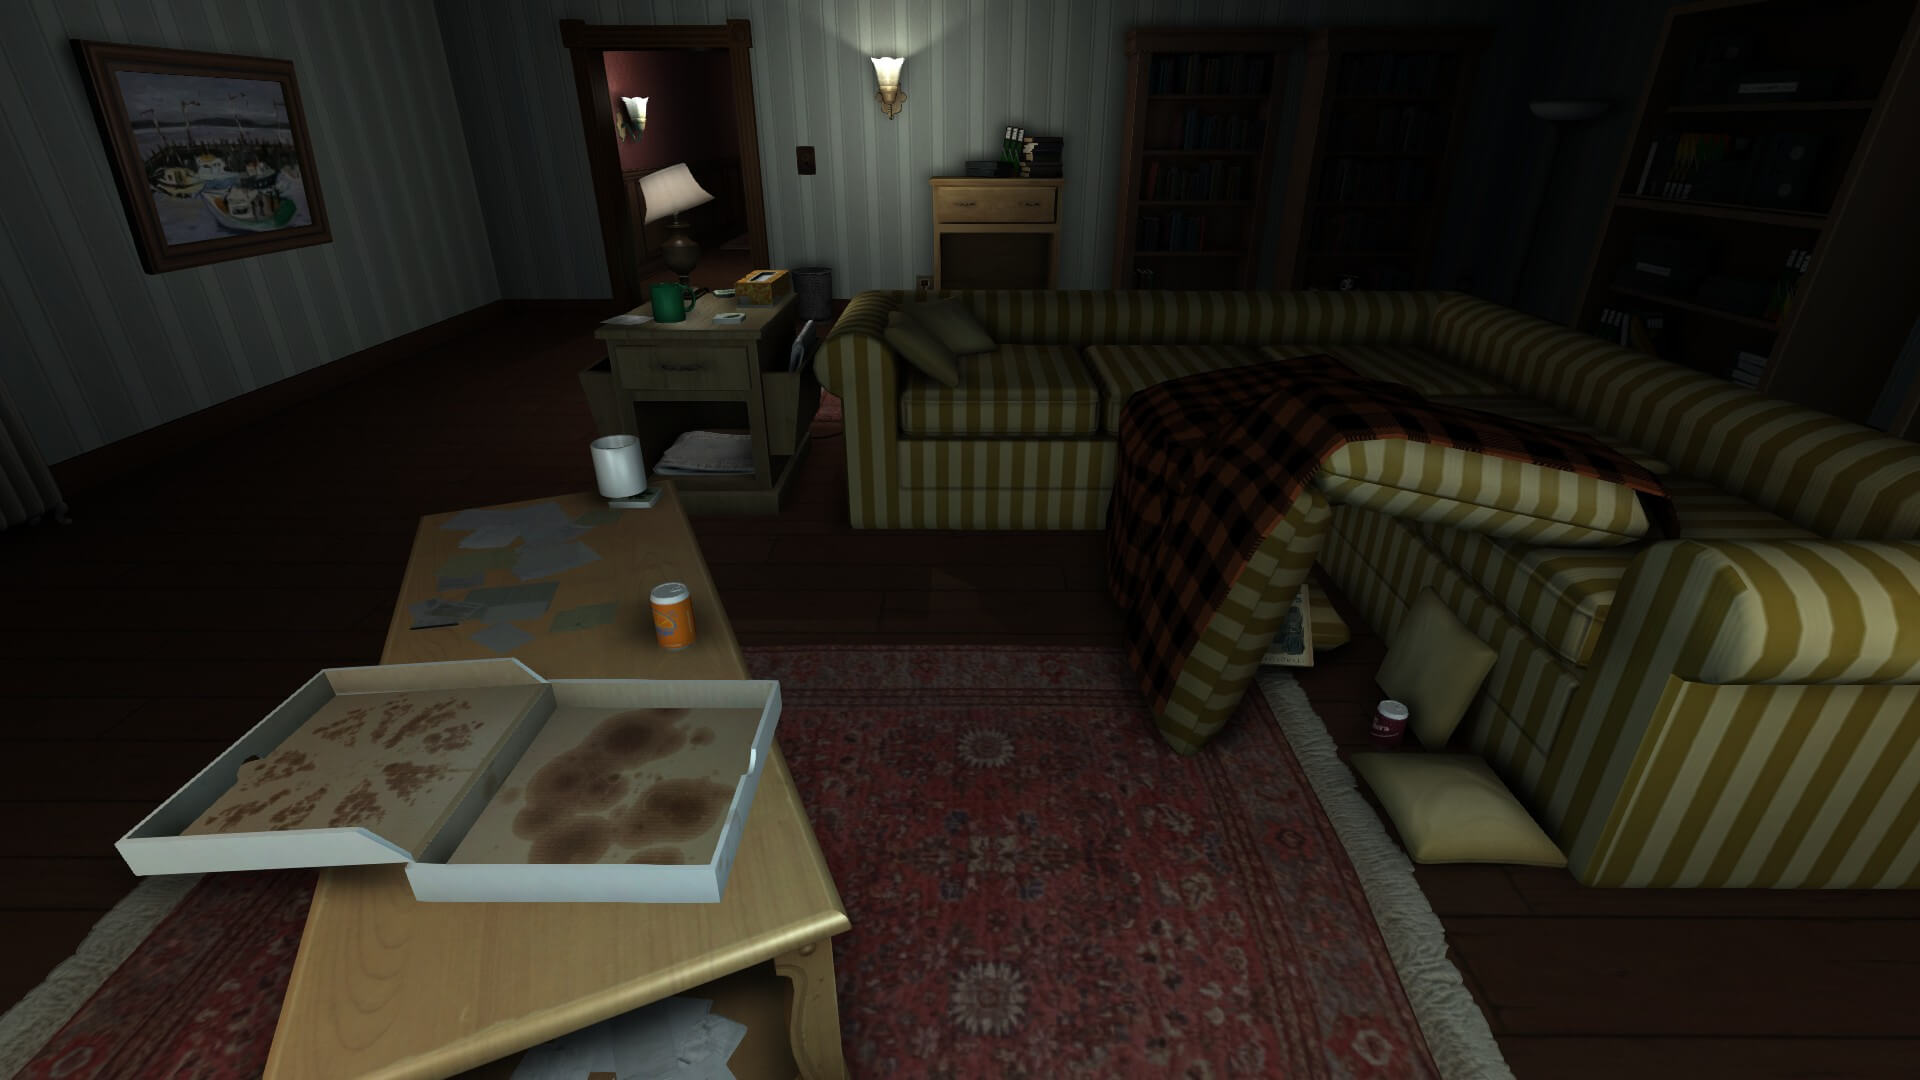 Gone Home, a game whose developer was hit by similar allegations to Ubisoft